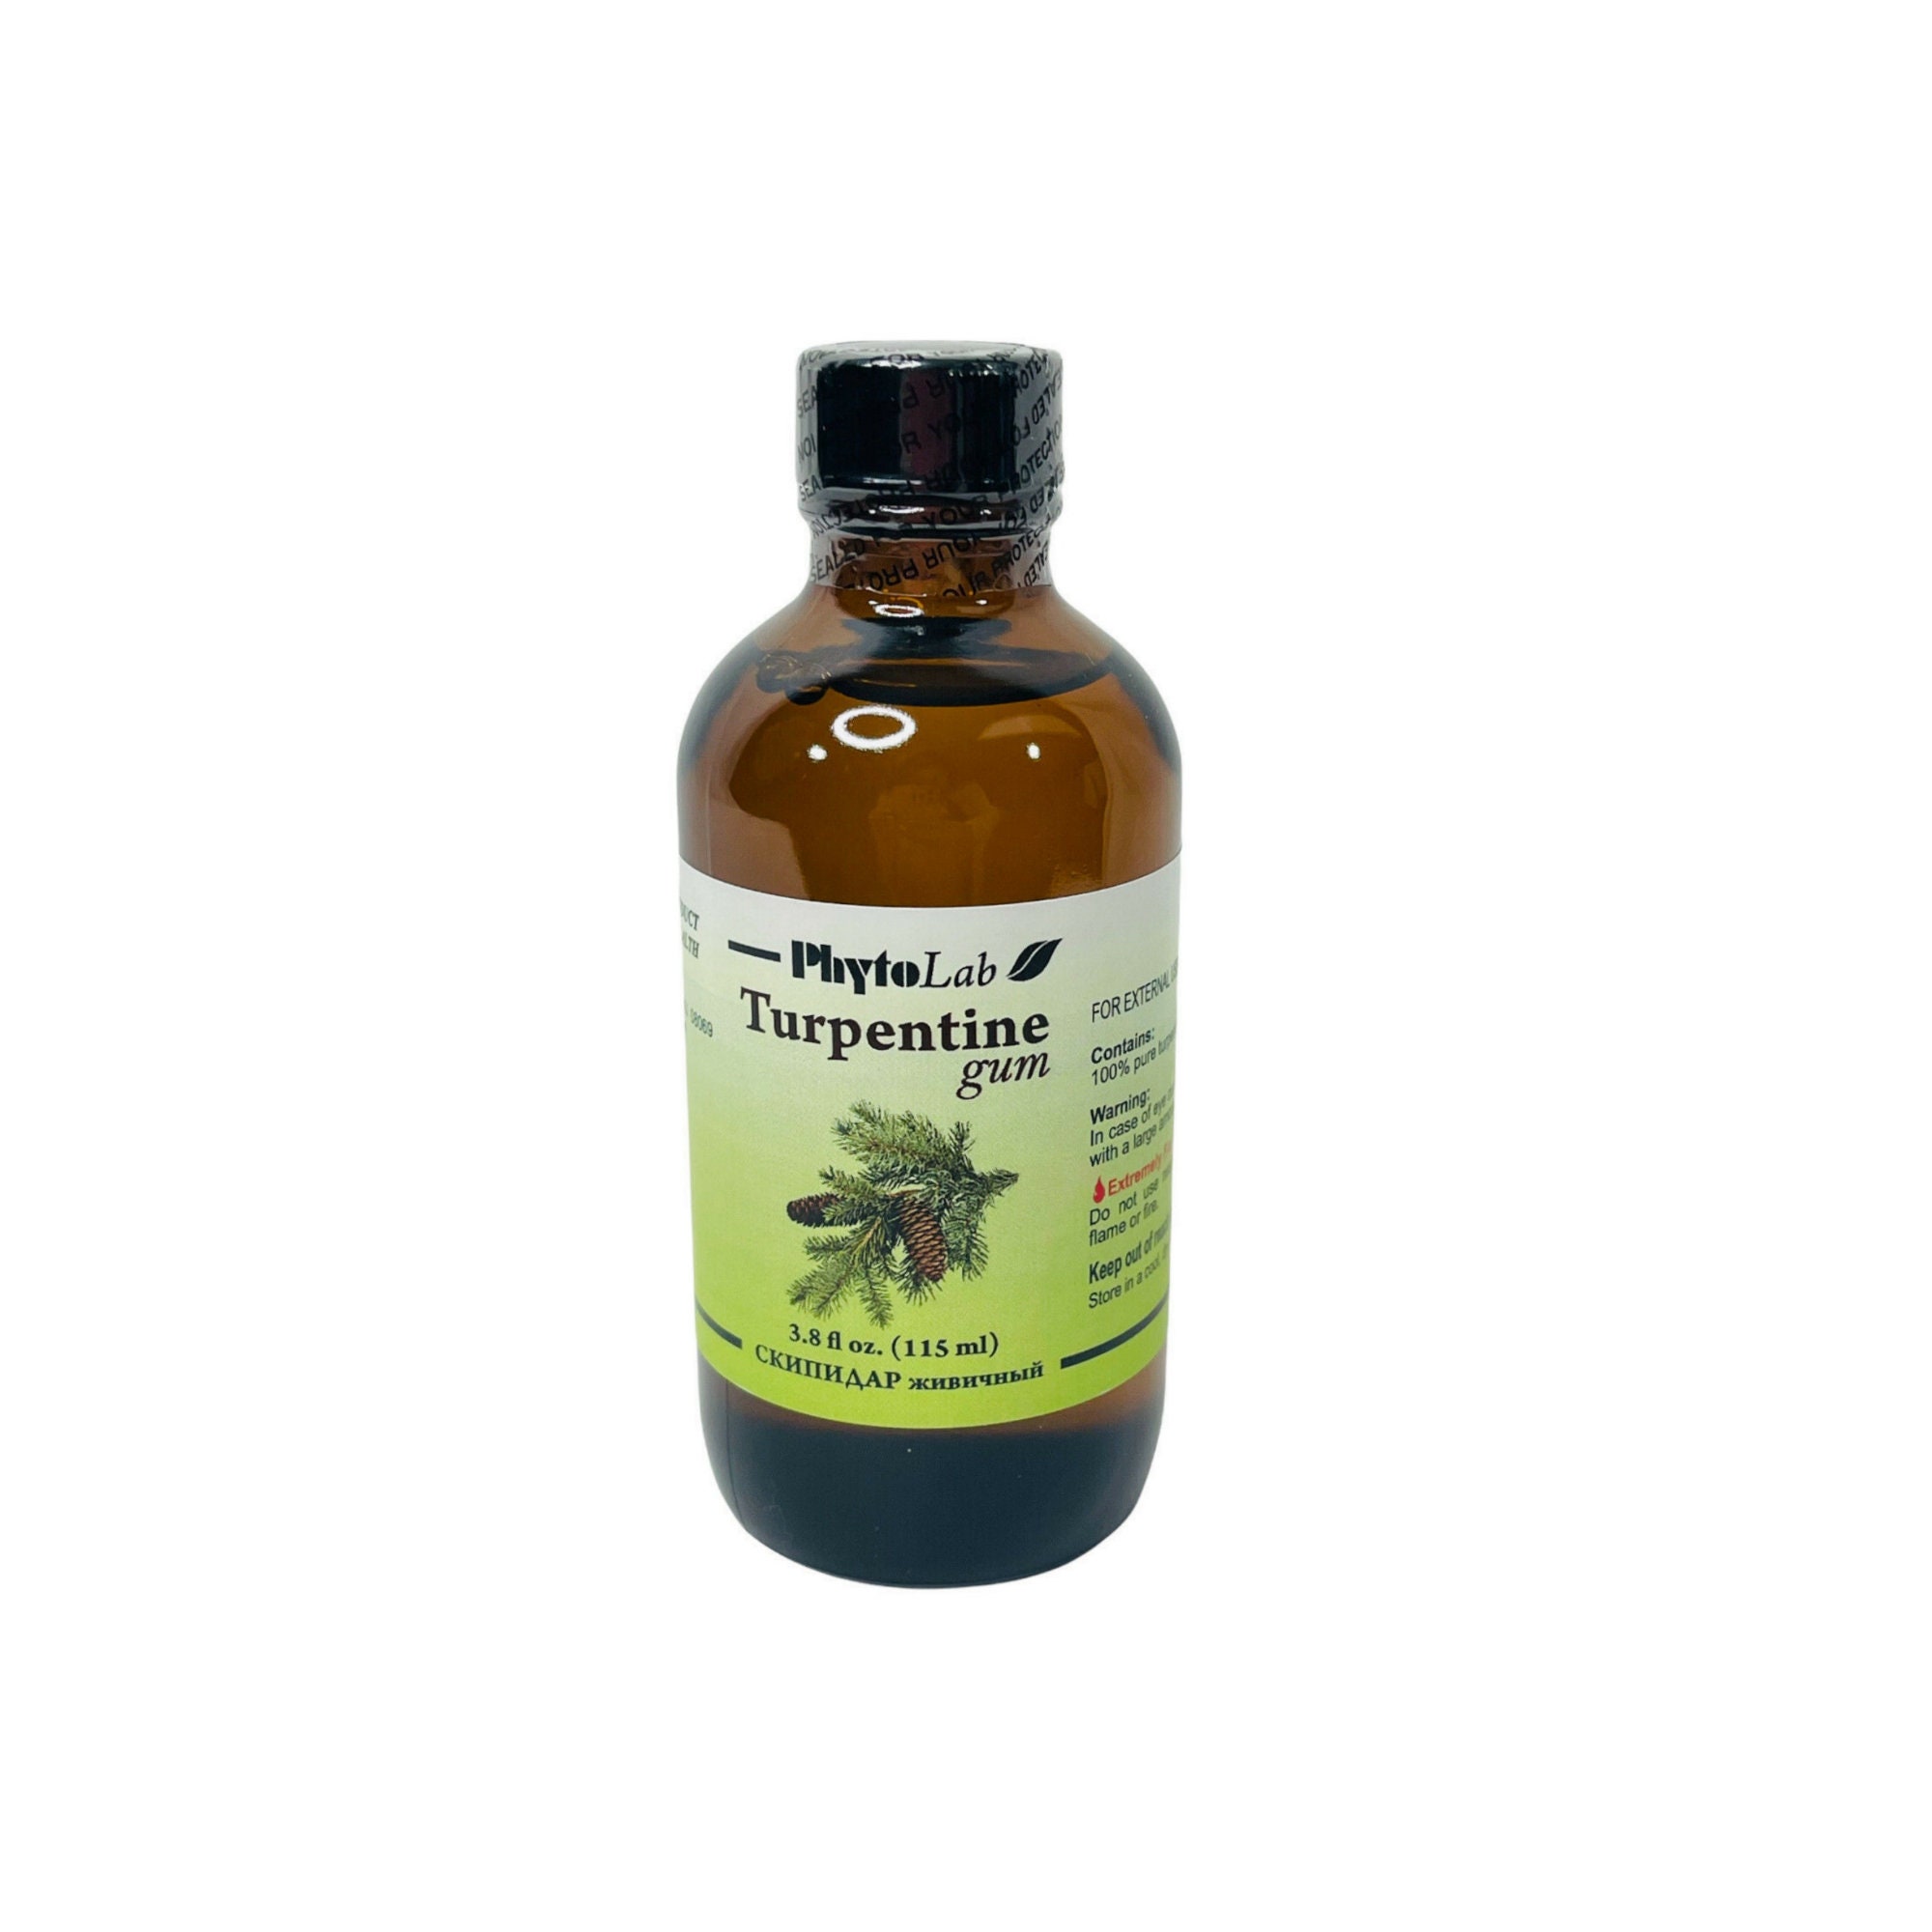 Turpentine Gum /pure Pine Gum Essential Oil 100% Natural Product From Pinus  Palustres USA Made 3.8 Fl Oz/115 Ml 